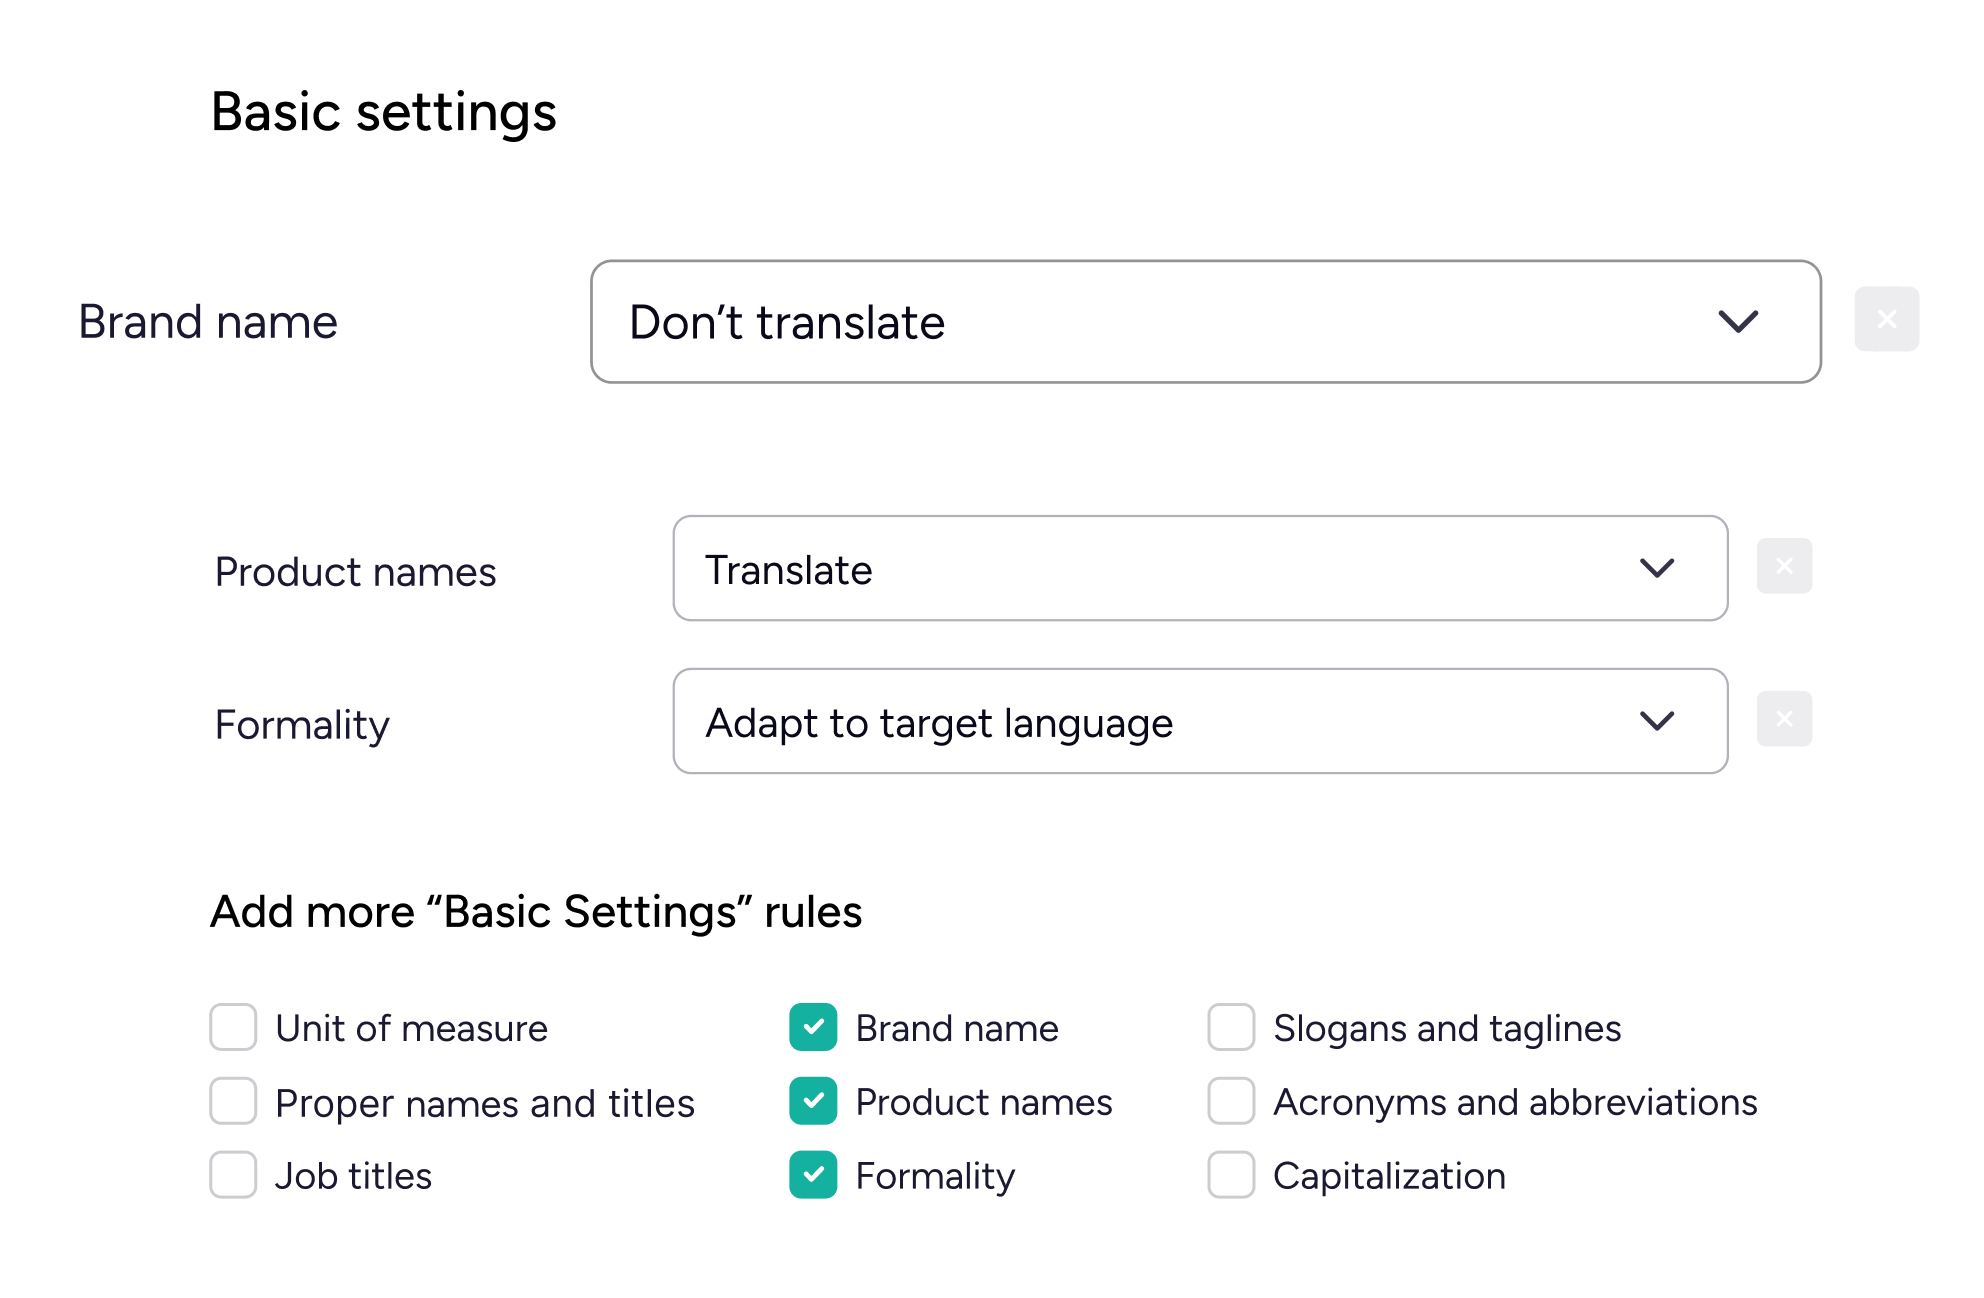 Basic style guide settings display product names and formality preferences.